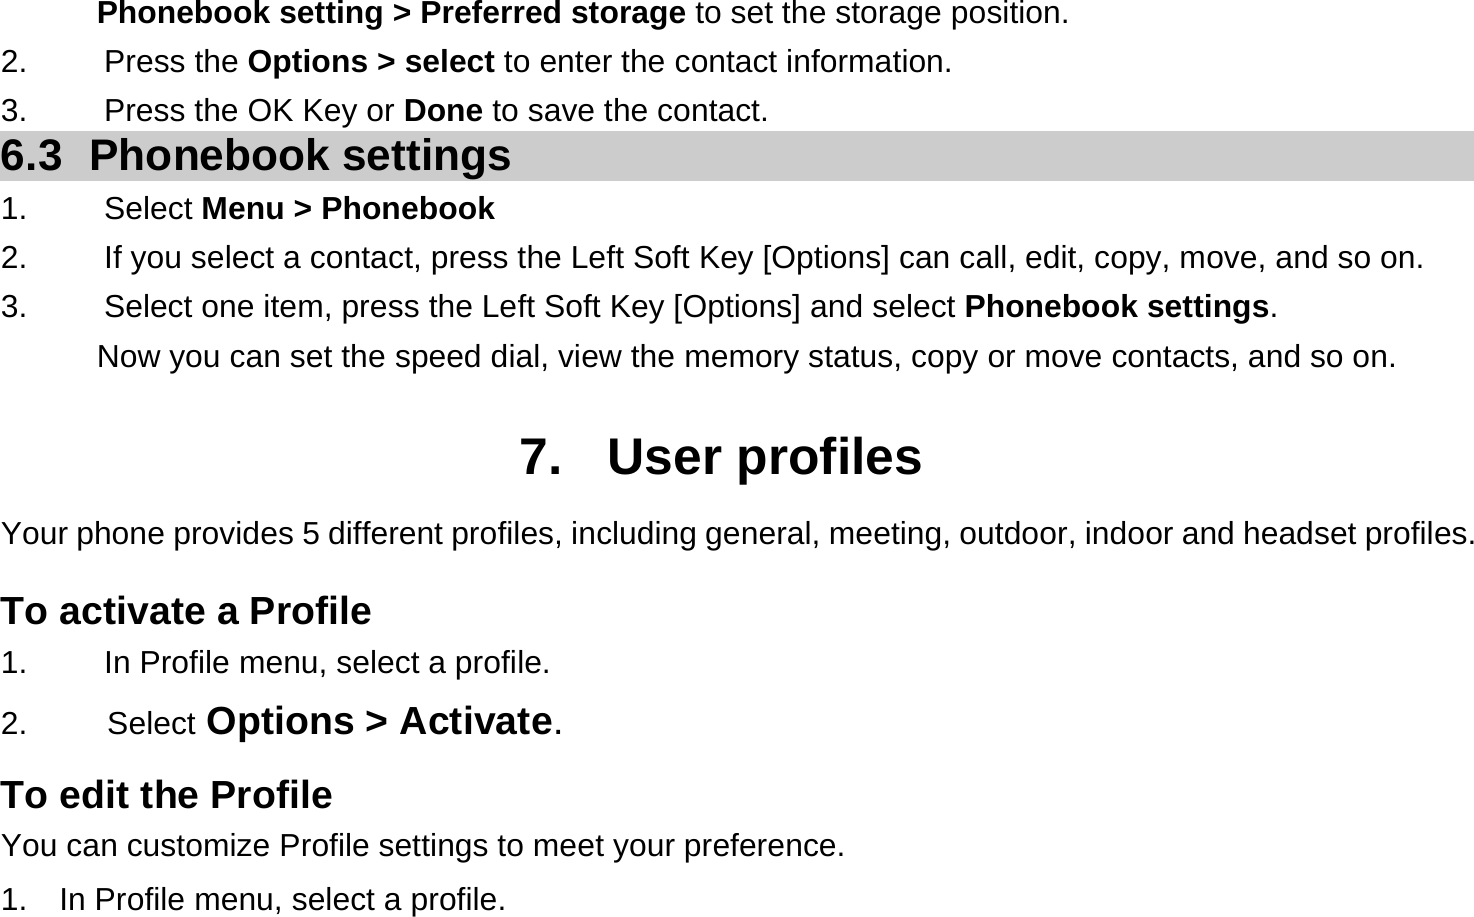 Phonebook setting &gt; Preferred storage to set the storage position. 2.   Press the Options &gt; select to enter the contact information. 3.    Press the OK Key or Done to save the contact. 6.3 Phonebook settings 1.   Select Menu &gt; Phonebook 2.  If you select a contact, press the Left Soft Key [Options] can call, edit, copy, move, and so on. 3.  Select one item, press the Left Soft Key [Options] and select Phonebook settings. Now you can set the speed dial, view the memory status, copy or move contacts, and so on.  7. User profiles Your phone provides 5 different profiles, including general, meeting, outdoor, indoor and headset profiles. To activate a Profile 1.  In Profile menu, select a profile.   2.     Select Options &gt; Activate.  To edit the Profile You can customize Profile settings to meet your preference. 1.    In Profile menu, select a profile. 